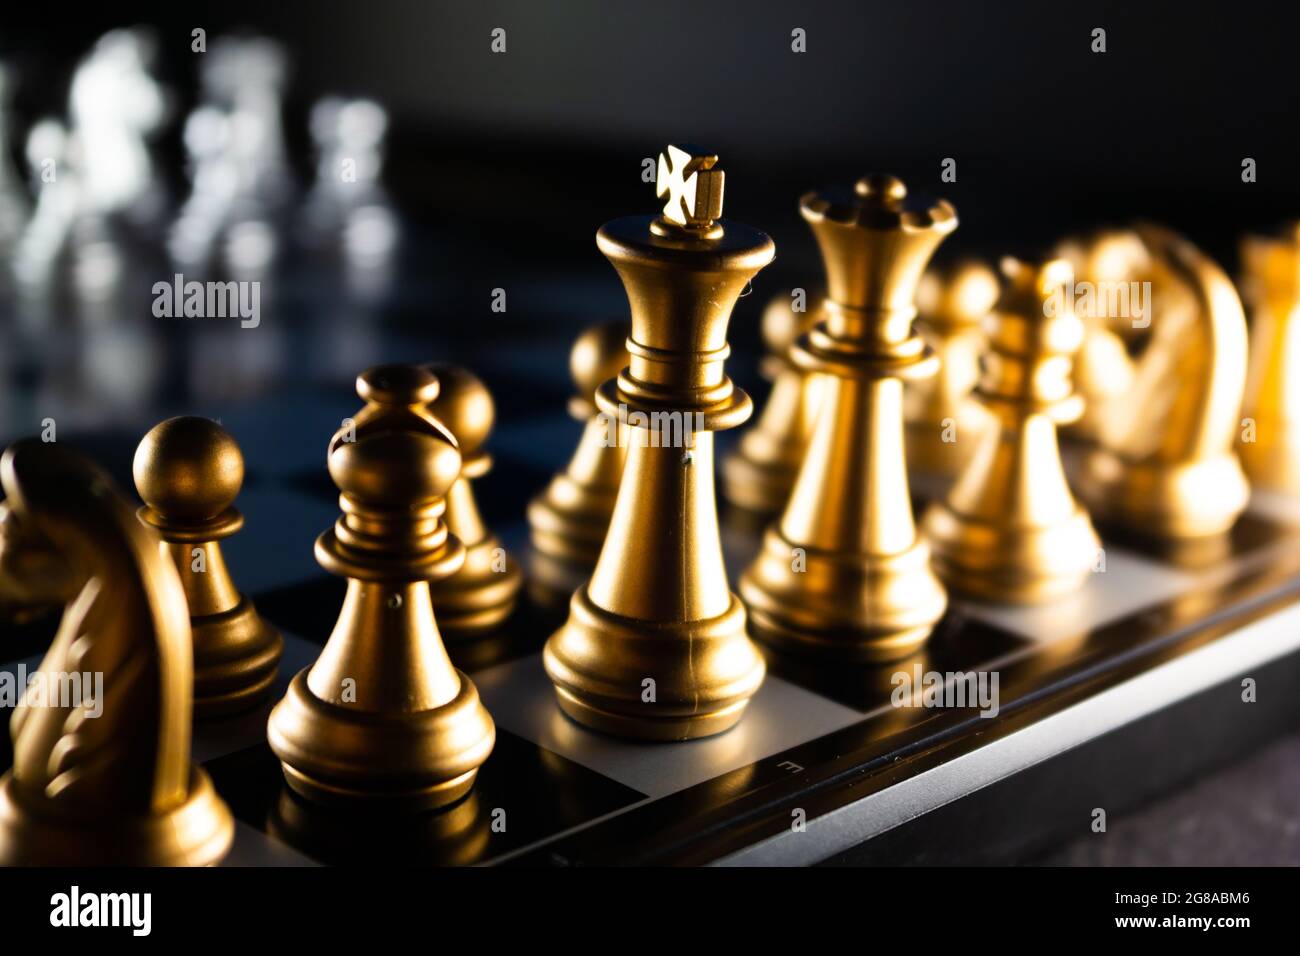 Chess pieces in starting position on a wooden Board Stock Photo by  ©Rostislavv 141335034